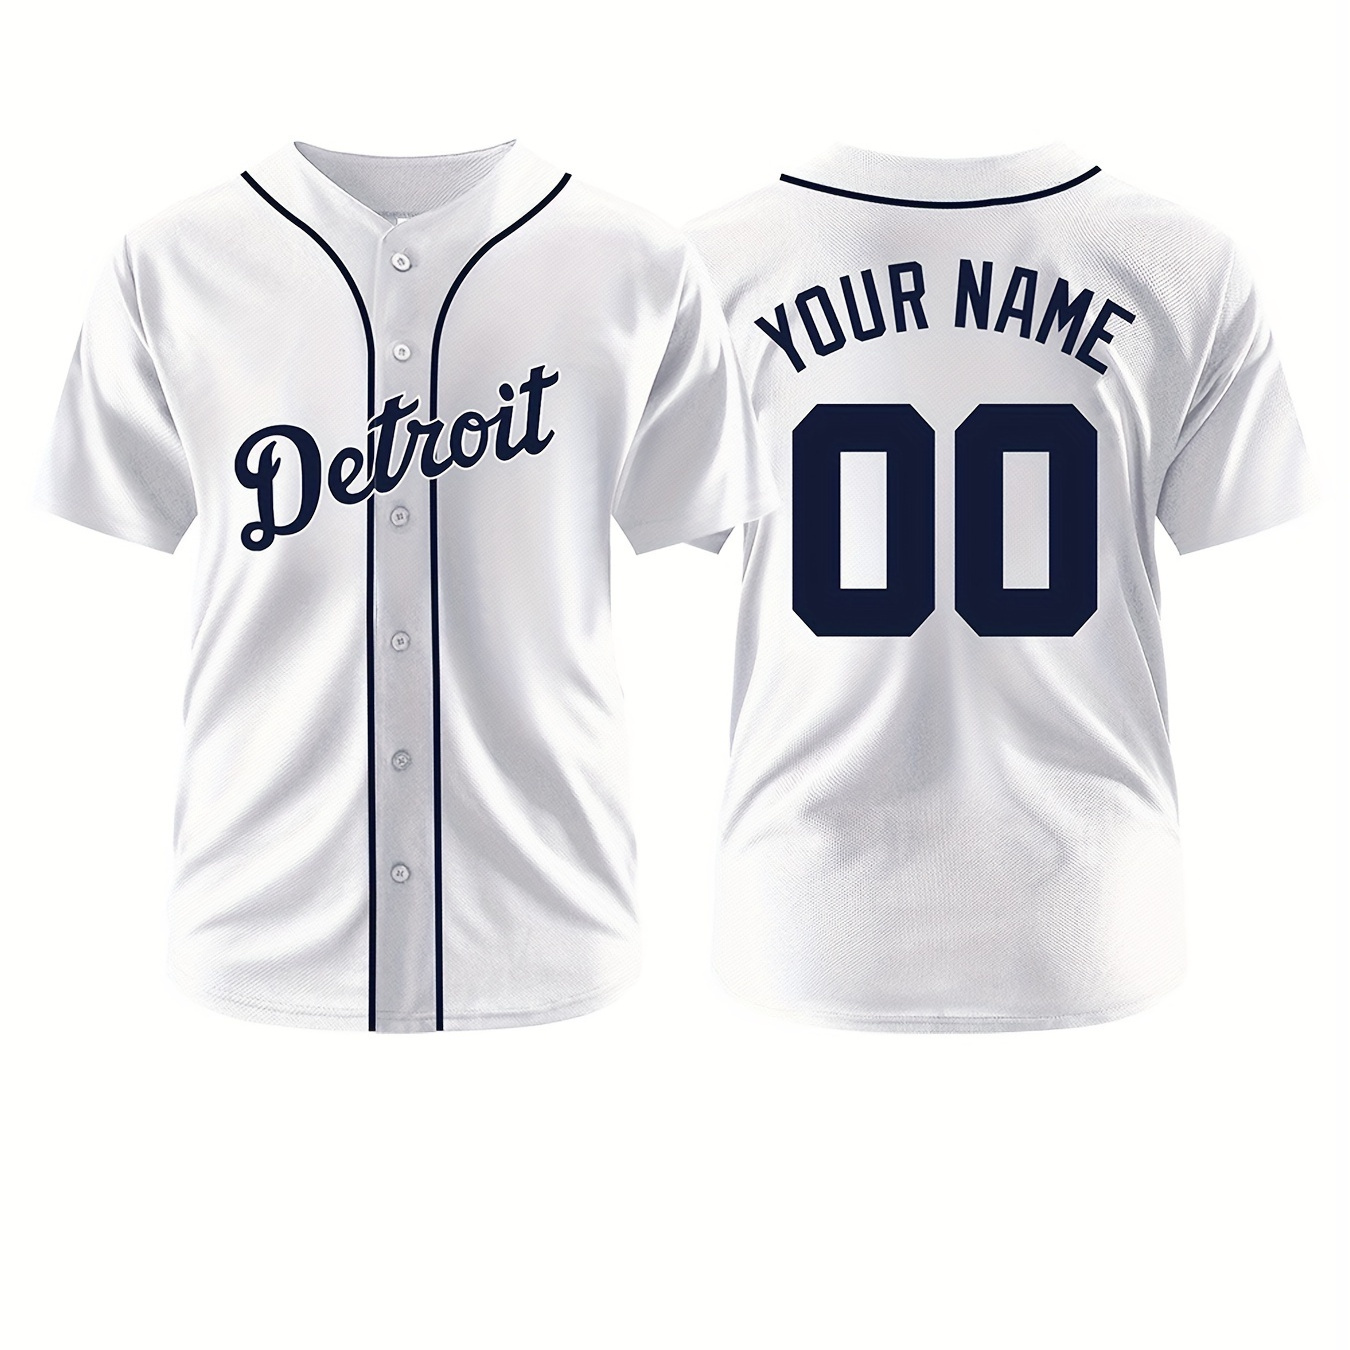 

Men's Baseball Jersey With Customized Name And Number Embroidery, Comfy Top For Summer Sport